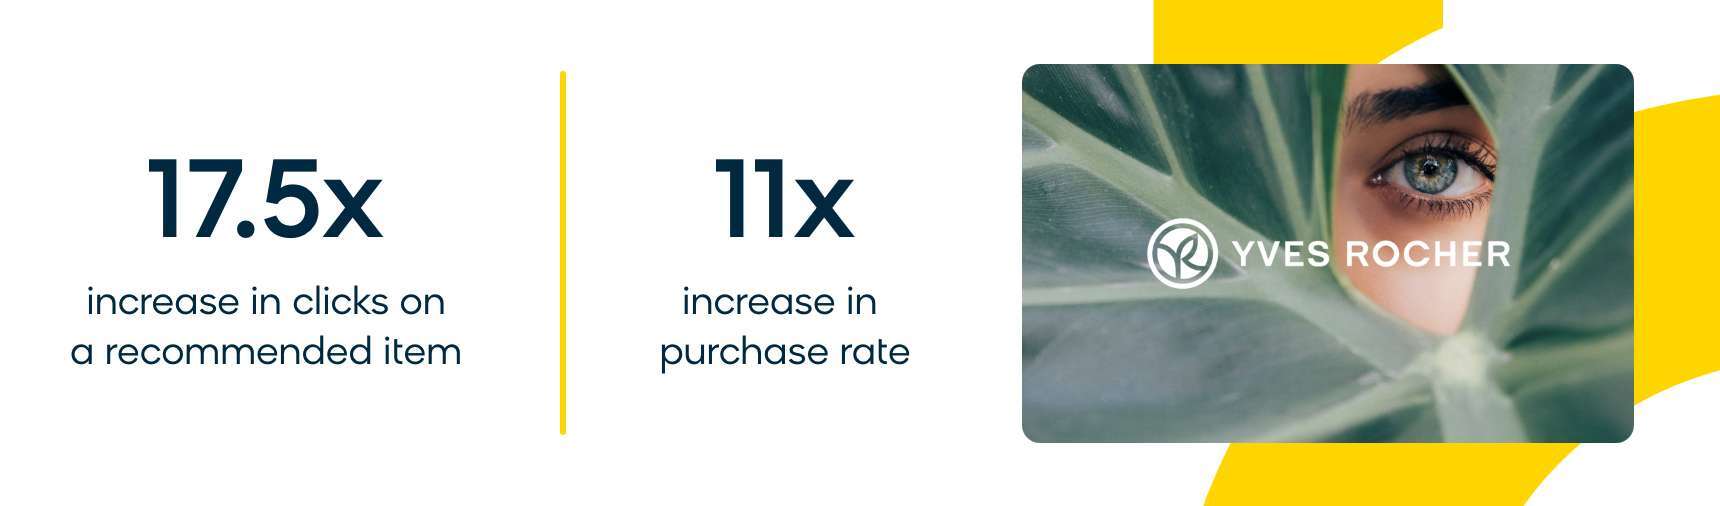 Yves Rocher increased purchase rate by 11x with Bloomreach